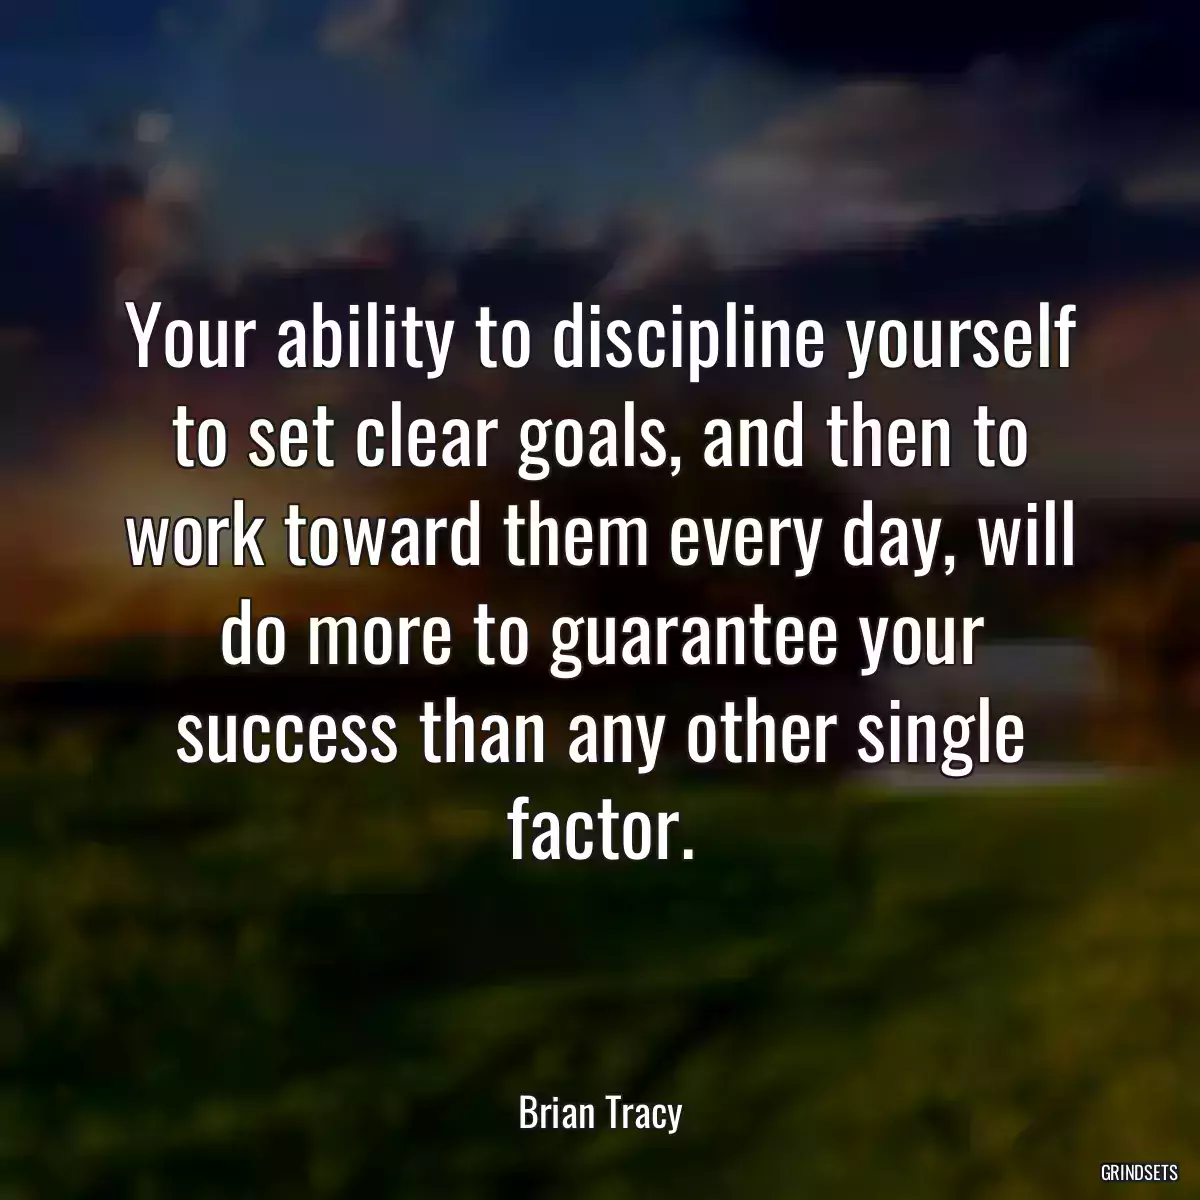 Your ability to discipline yourself to set clear goals, and then to work toward them every day, will do more to guarantee your success than any other single factor.